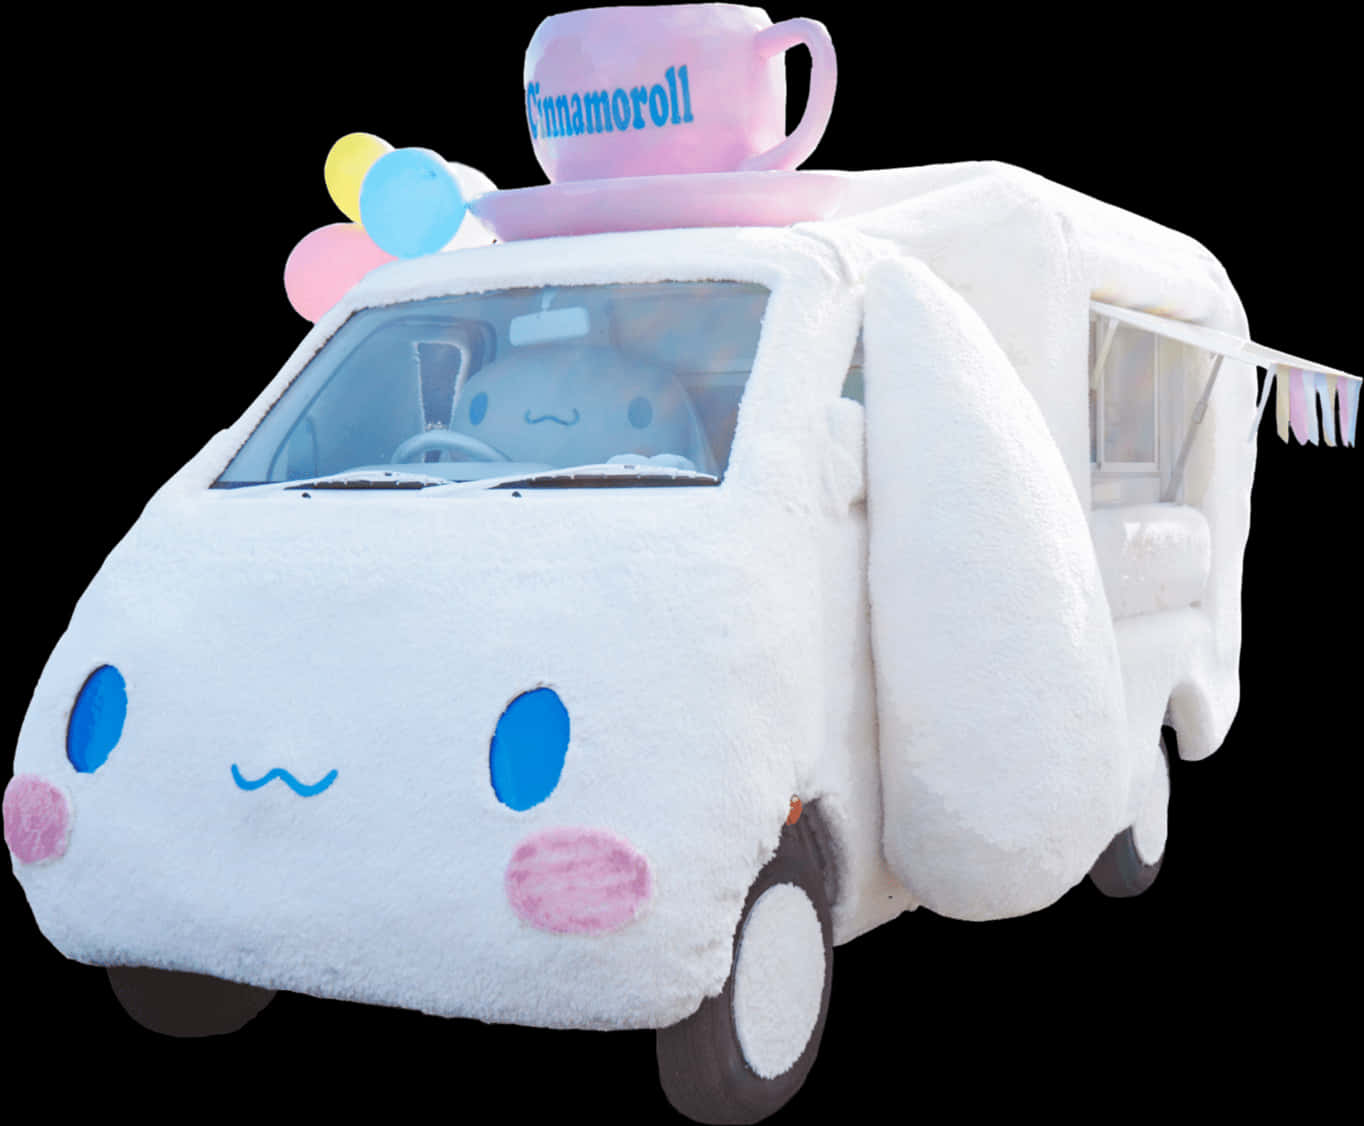 A White Vehicle With A Cup On Top And Balloons On The Roof